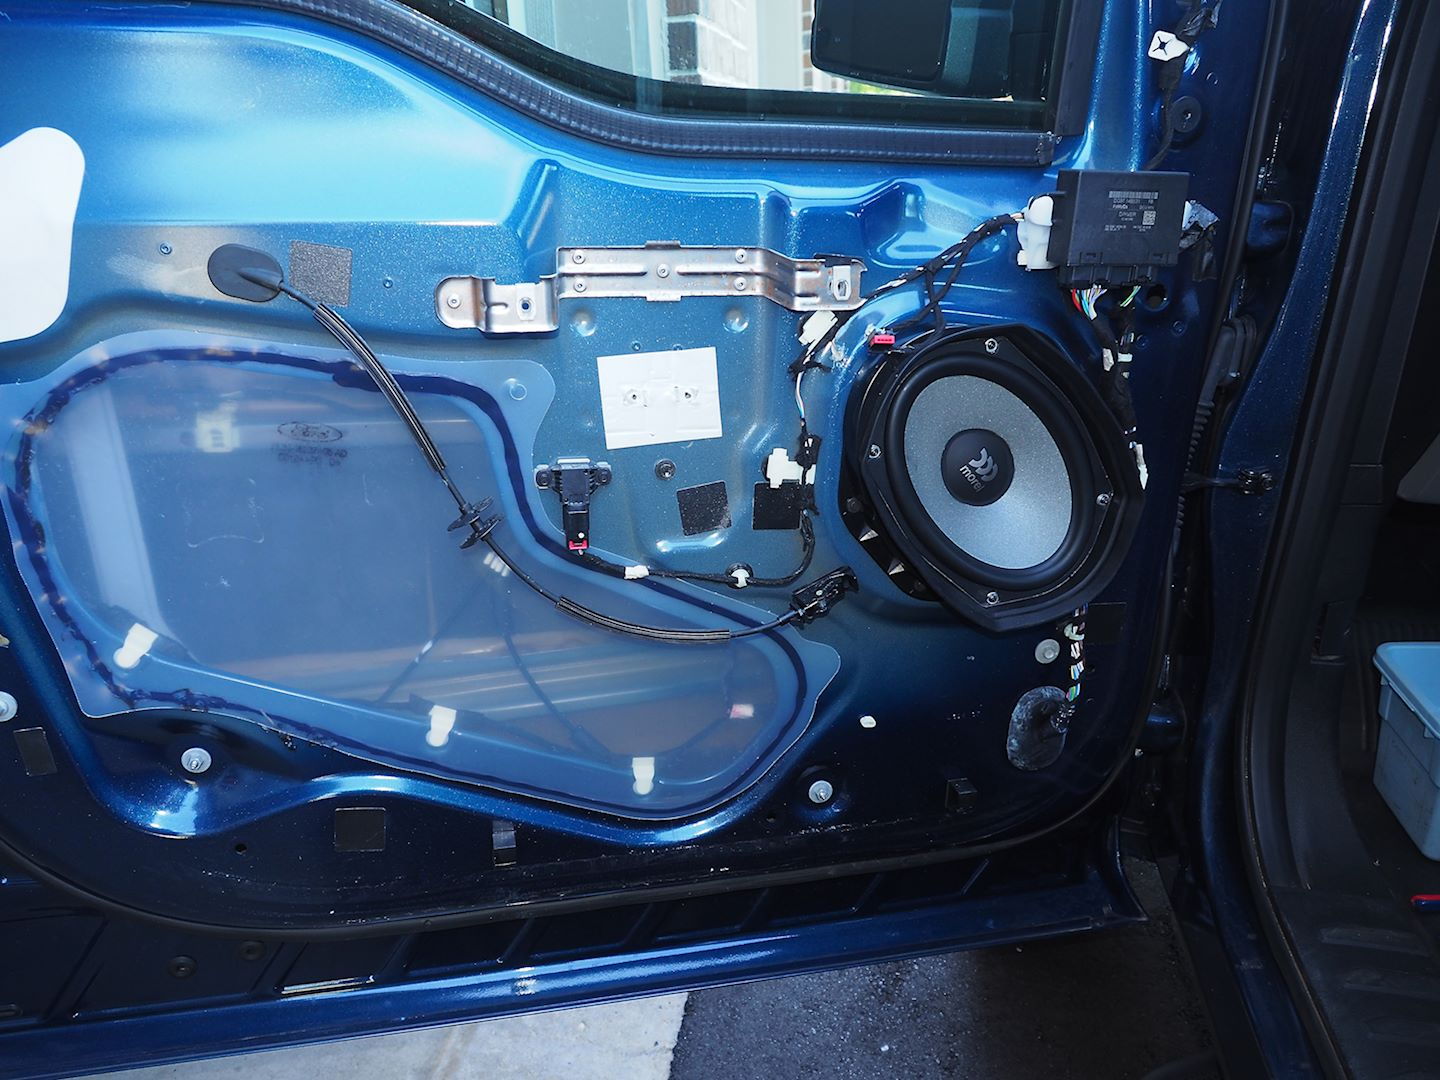 Speaker Wiring Diagram - Ford F150 Forum - Community of Ford Truck Fans